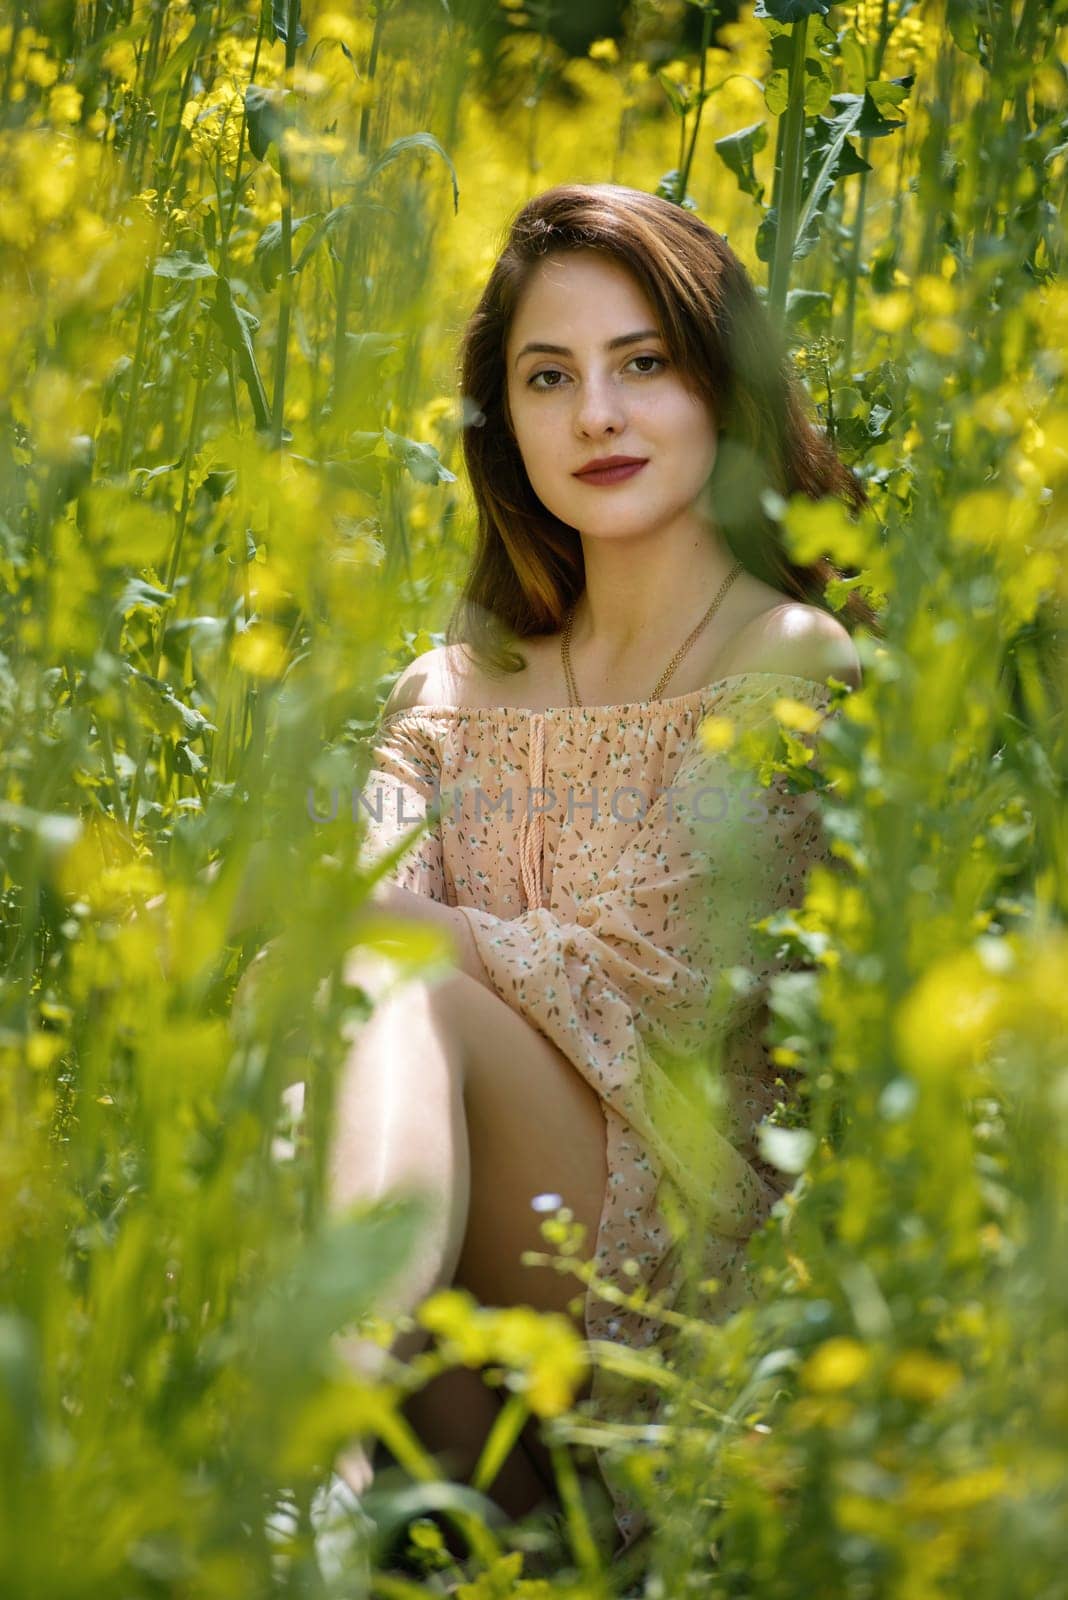 Young woman surrounded by canola flowers. Spring blossom field.